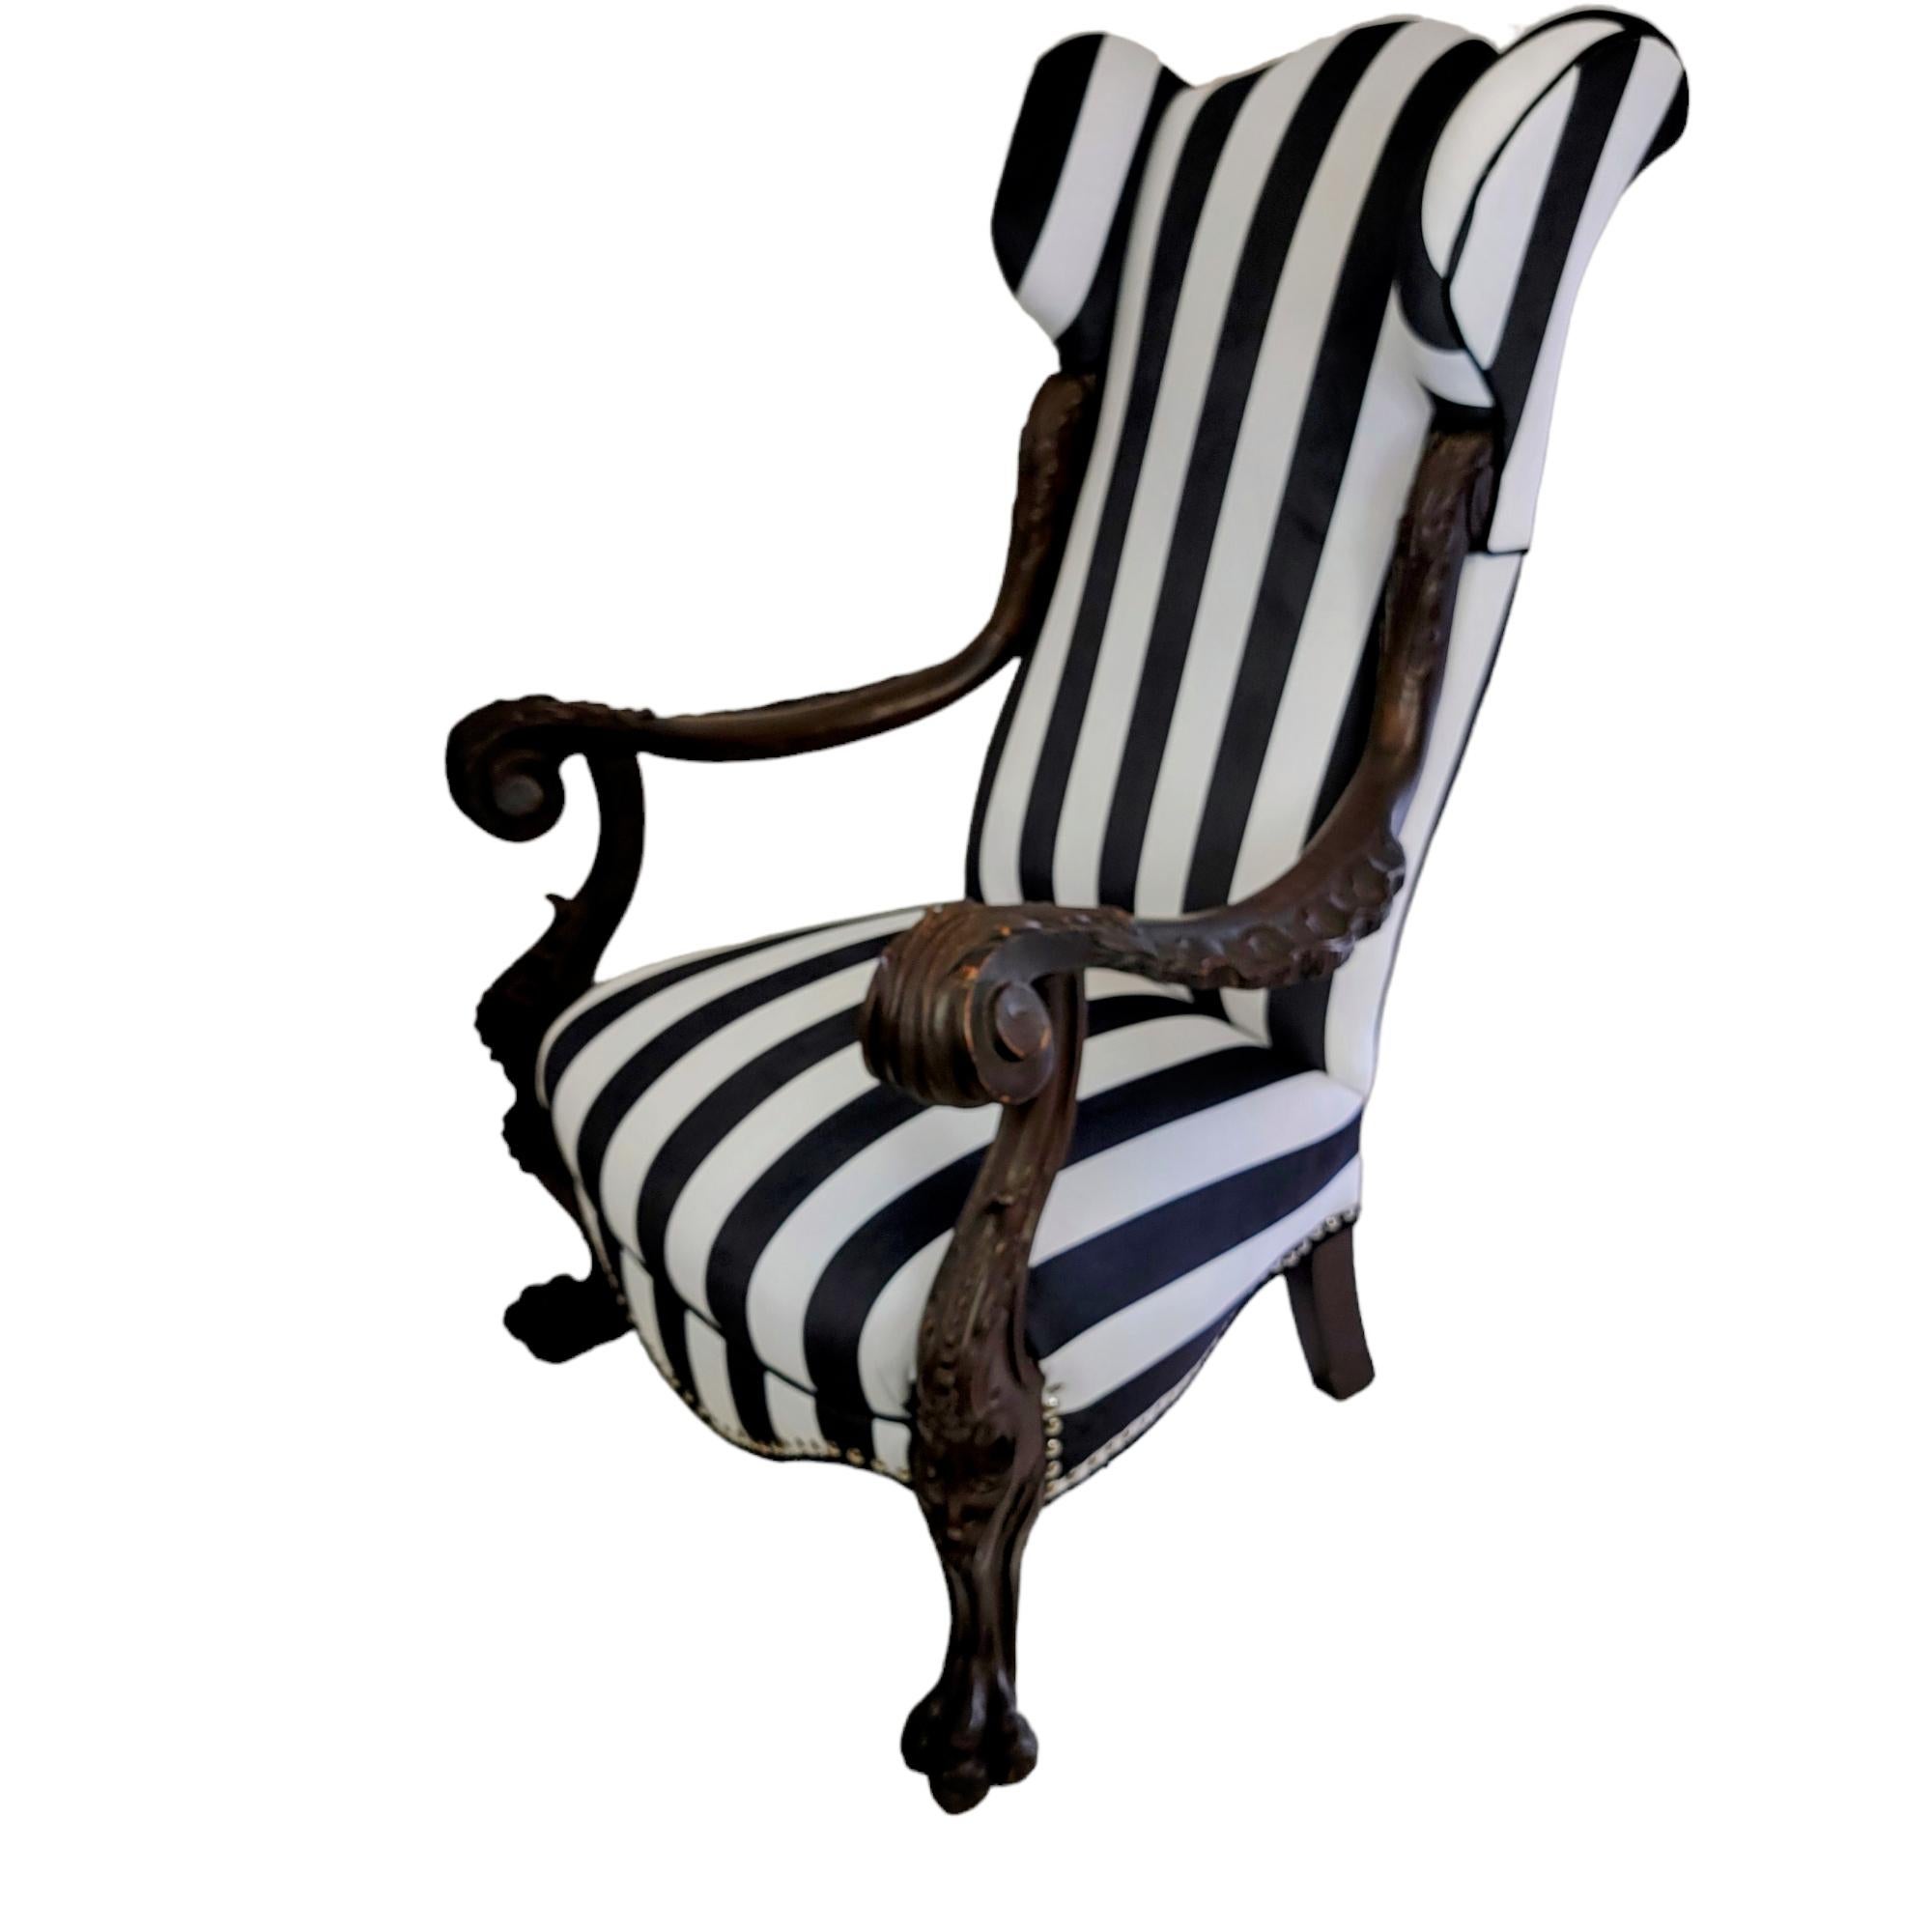 Originating from the Rococo Revival period, this antique Italian wingback chair is nearly 160 years old. It has been newly reupholstered in luxurious black and white velvet, creating something remarkably different and bold to really make a room pop.